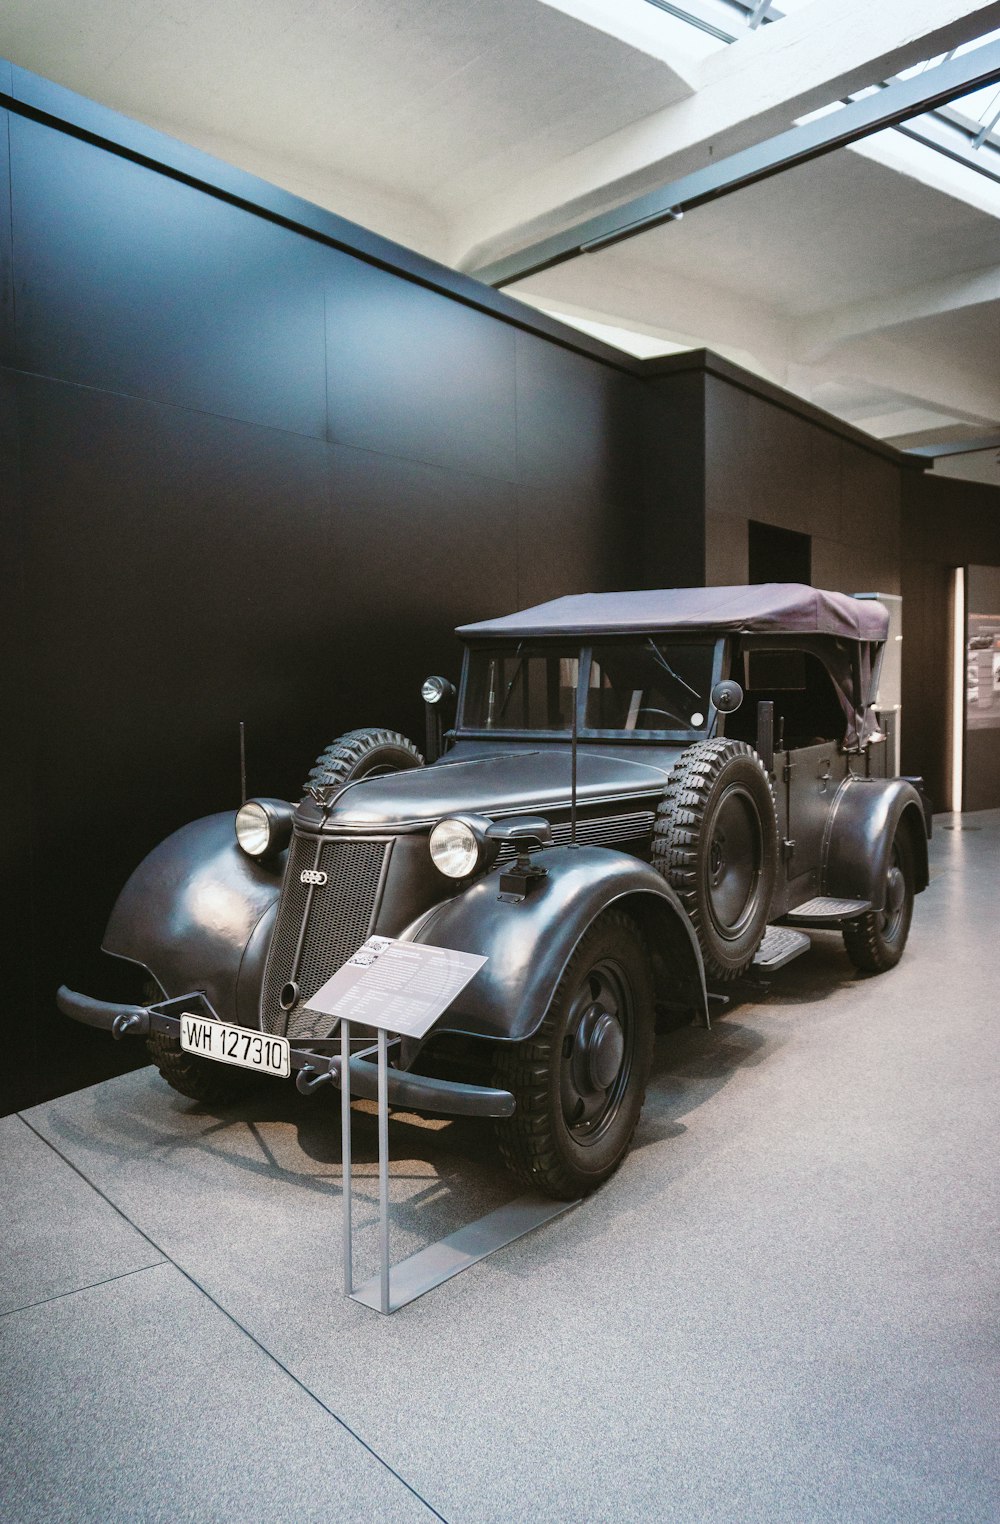 an antique car is on display in a museum